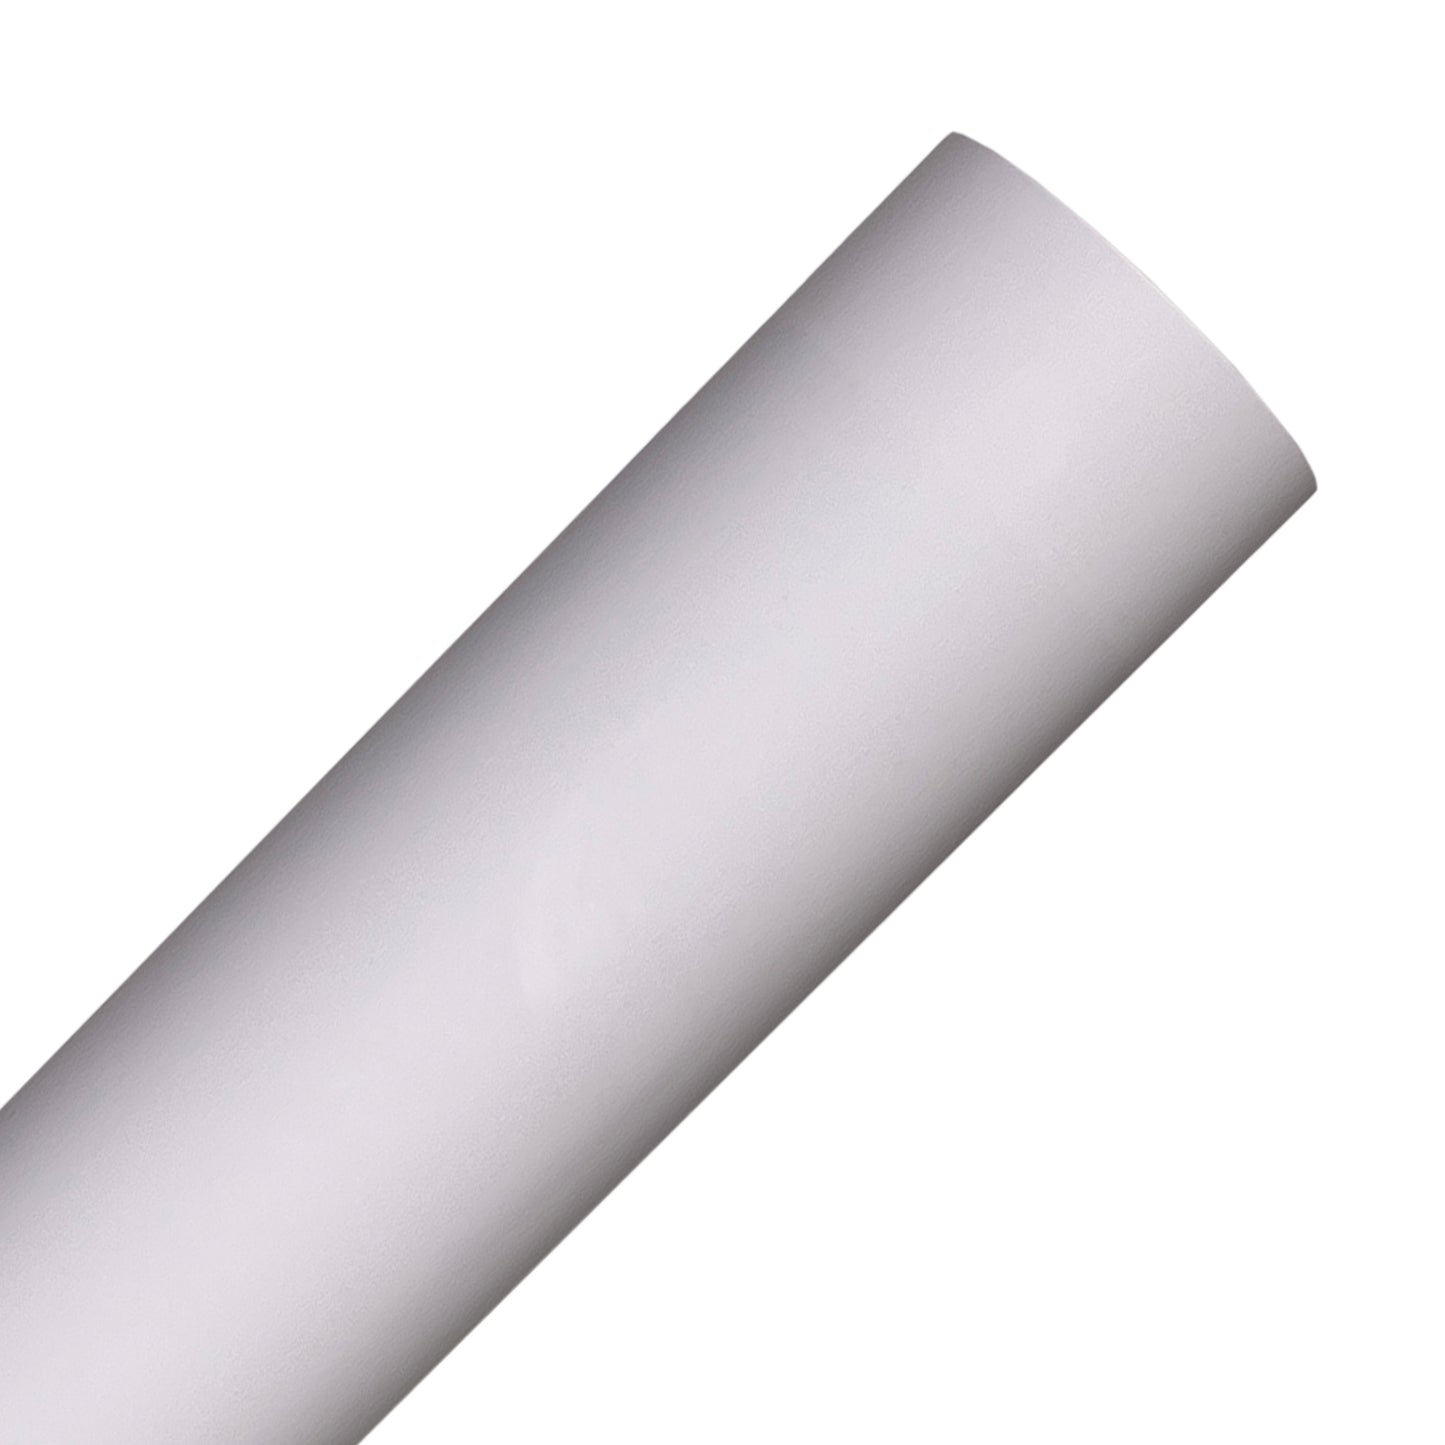 White Silicone Heat Transfer Vinyl Rolls By Craftables